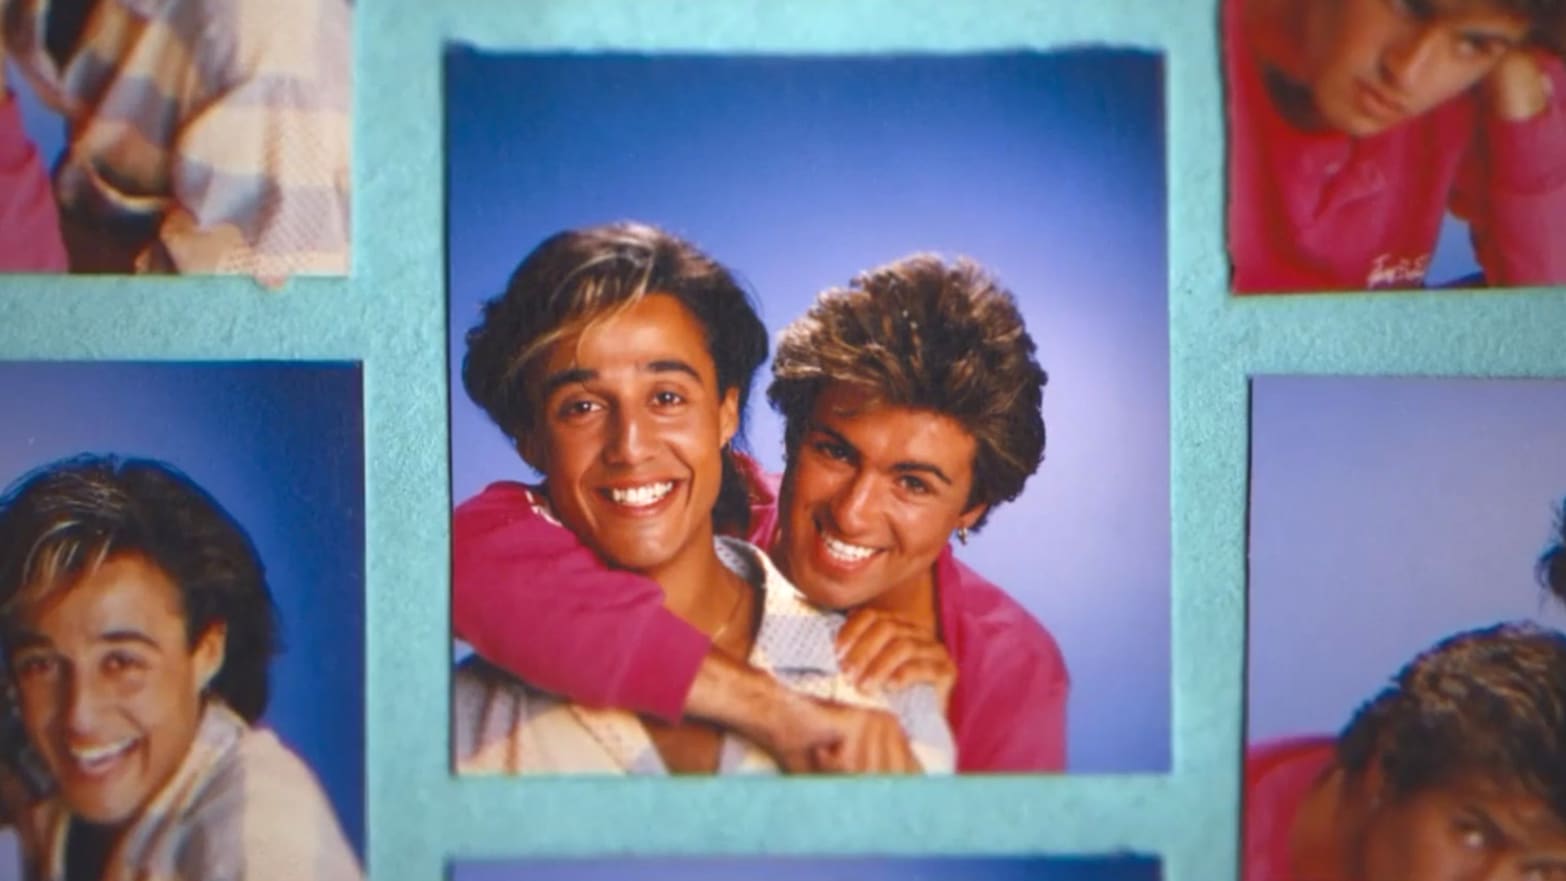 Archival photos of George Michael and Andrew Ridgeley in Wham!